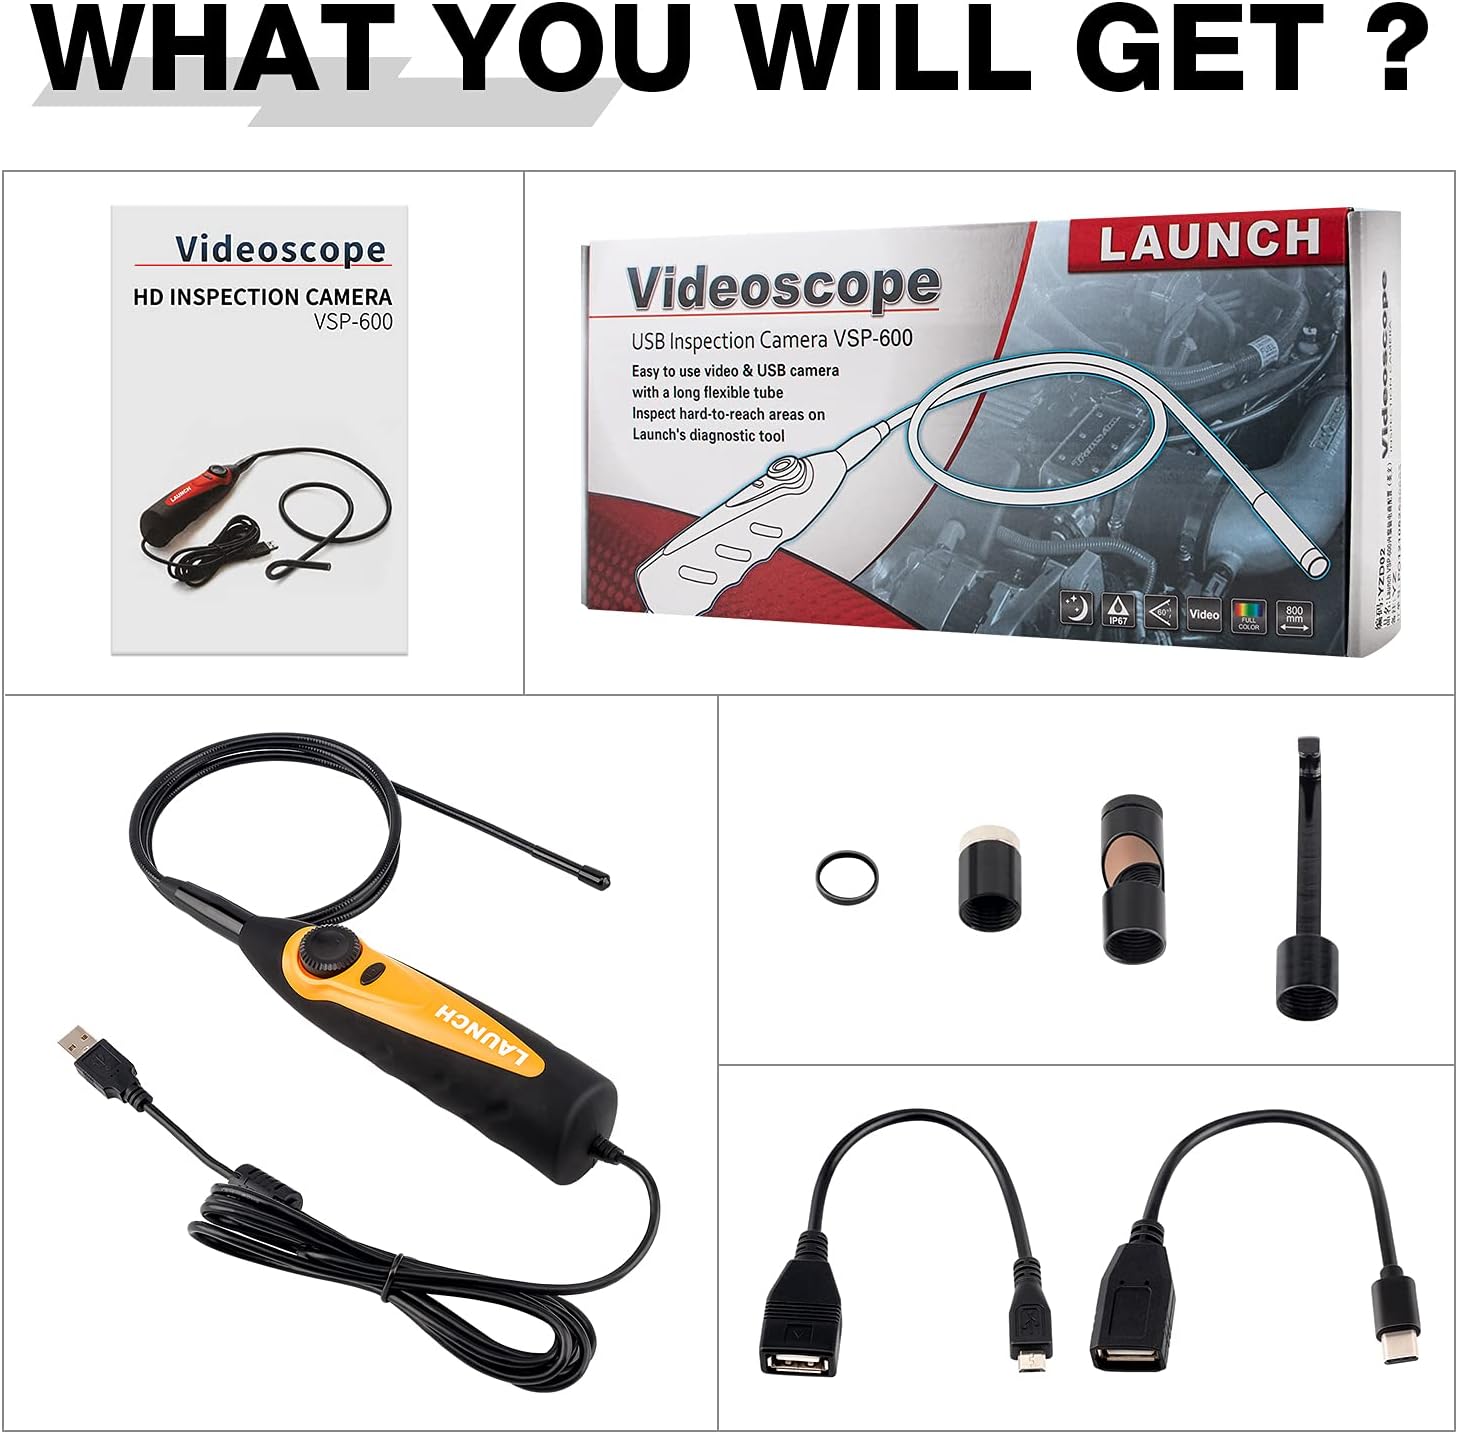 LAUNCH VSP-600 Videoscope, 7mm Snake Camera with 6 LED Lights USB Borescope, IP67 Waterproof HD Borescope Inspection Camera, Industrial HD Endoscope for X-431 Series, Android Cellphone